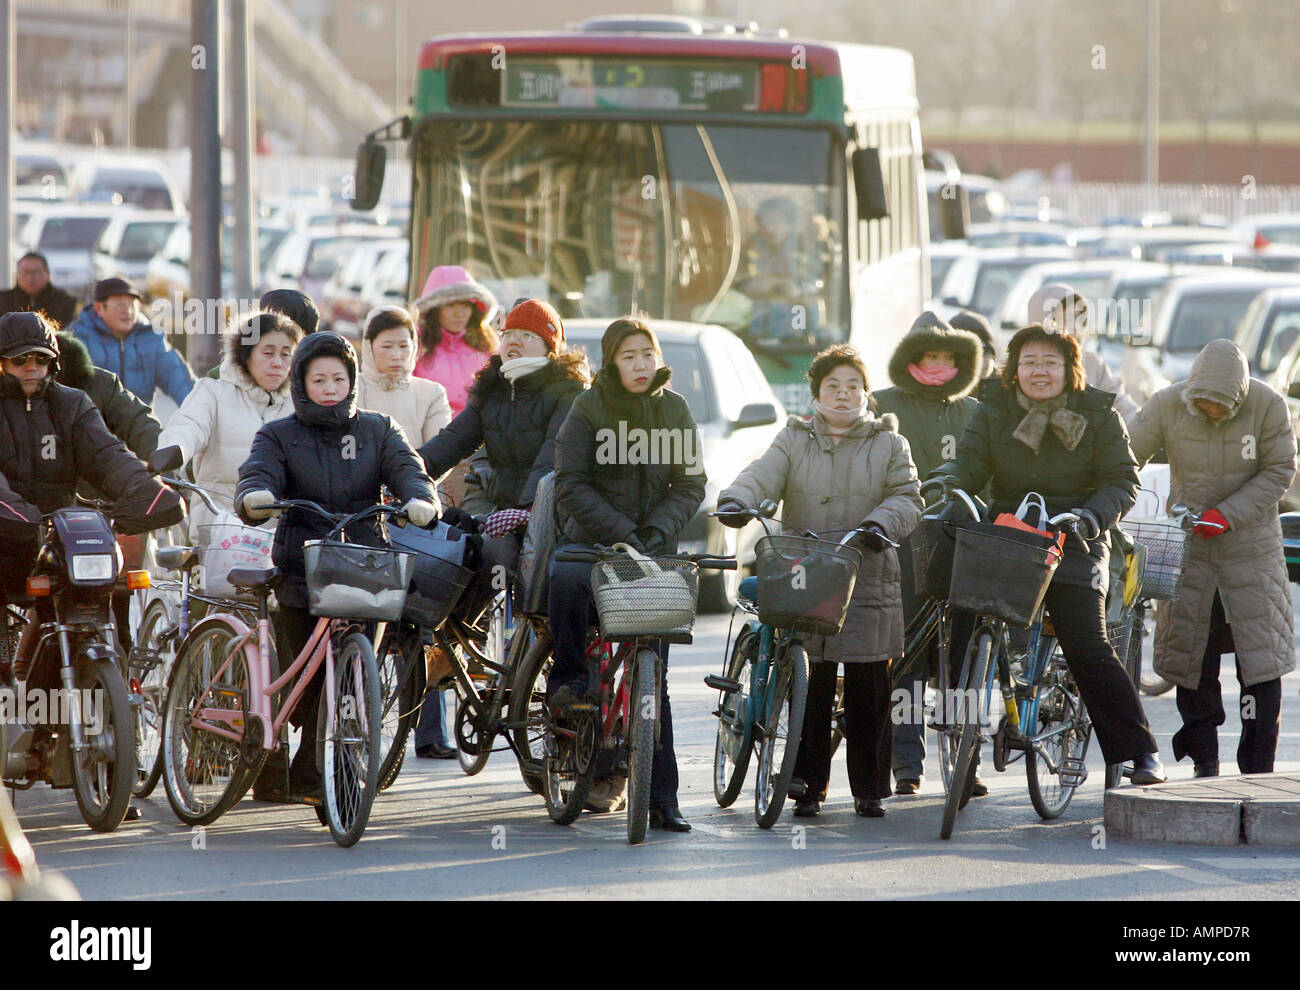 Bicyclists in a street, Beijing, China Stock Photo